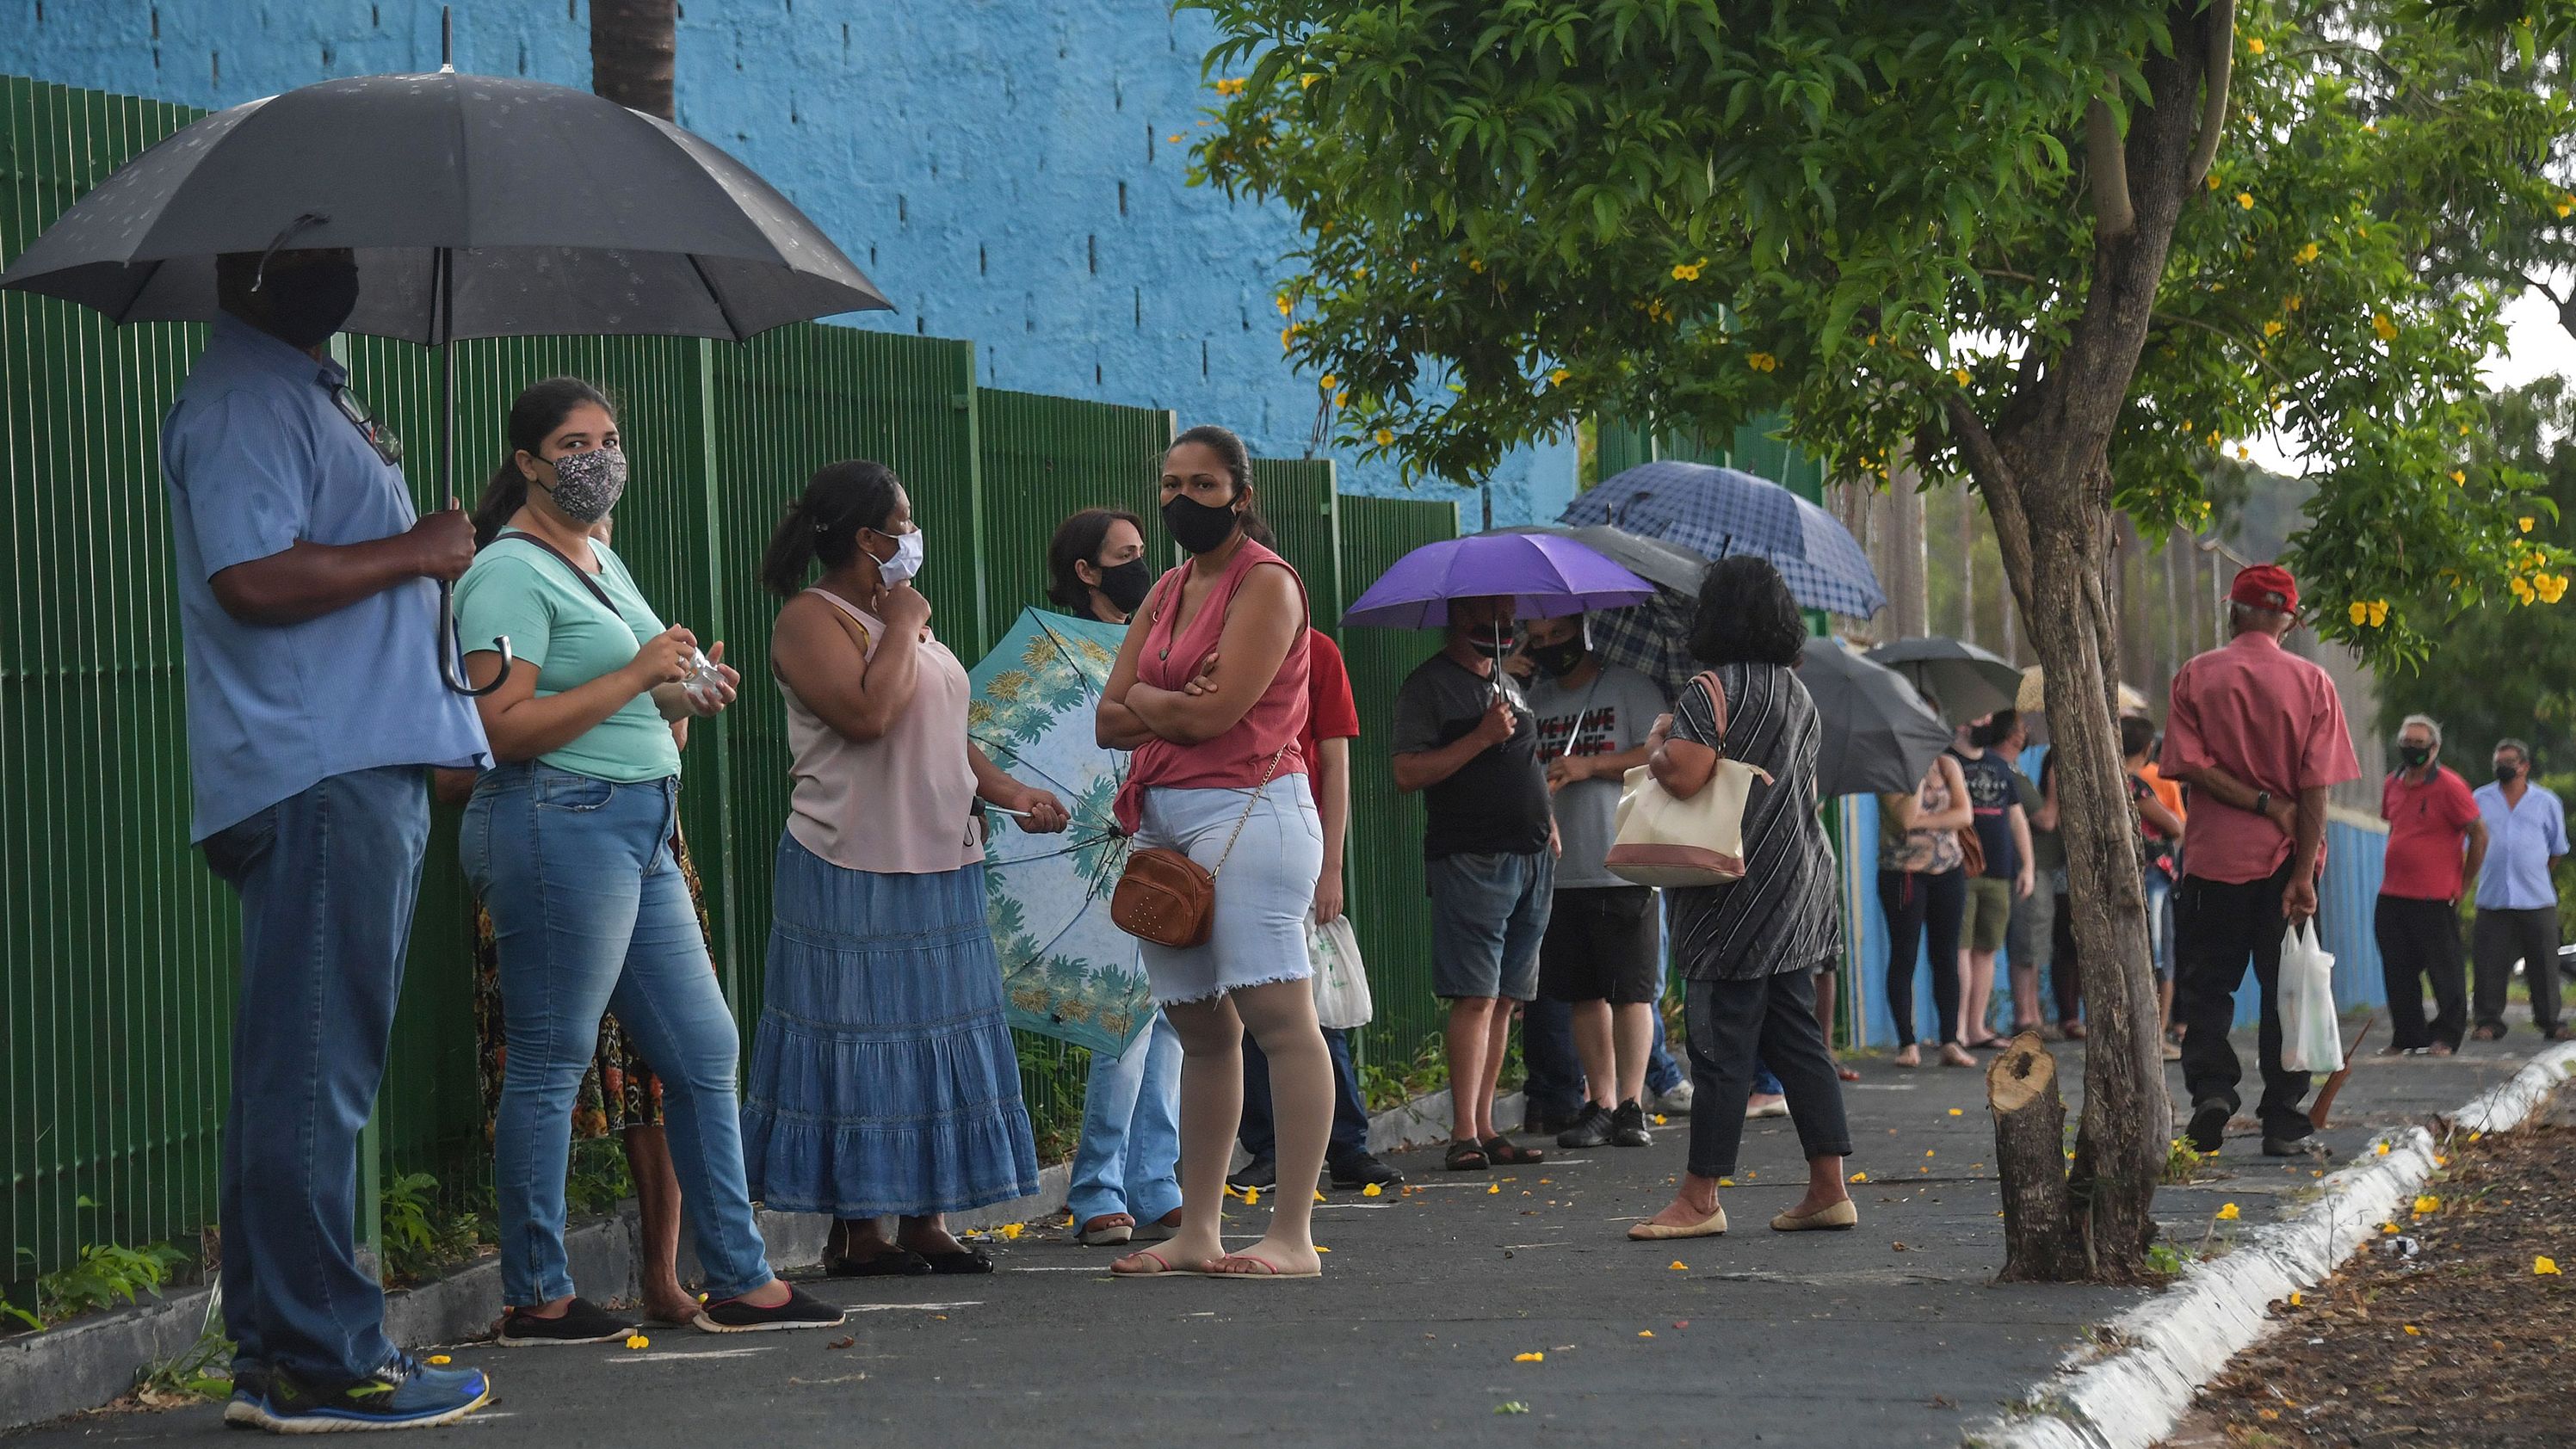 Residents line up to receive the Coronavac vaccine against COVID-19, in Serrana, about 323 km from Sao Paulo, Brazil, on February 17, 2021.